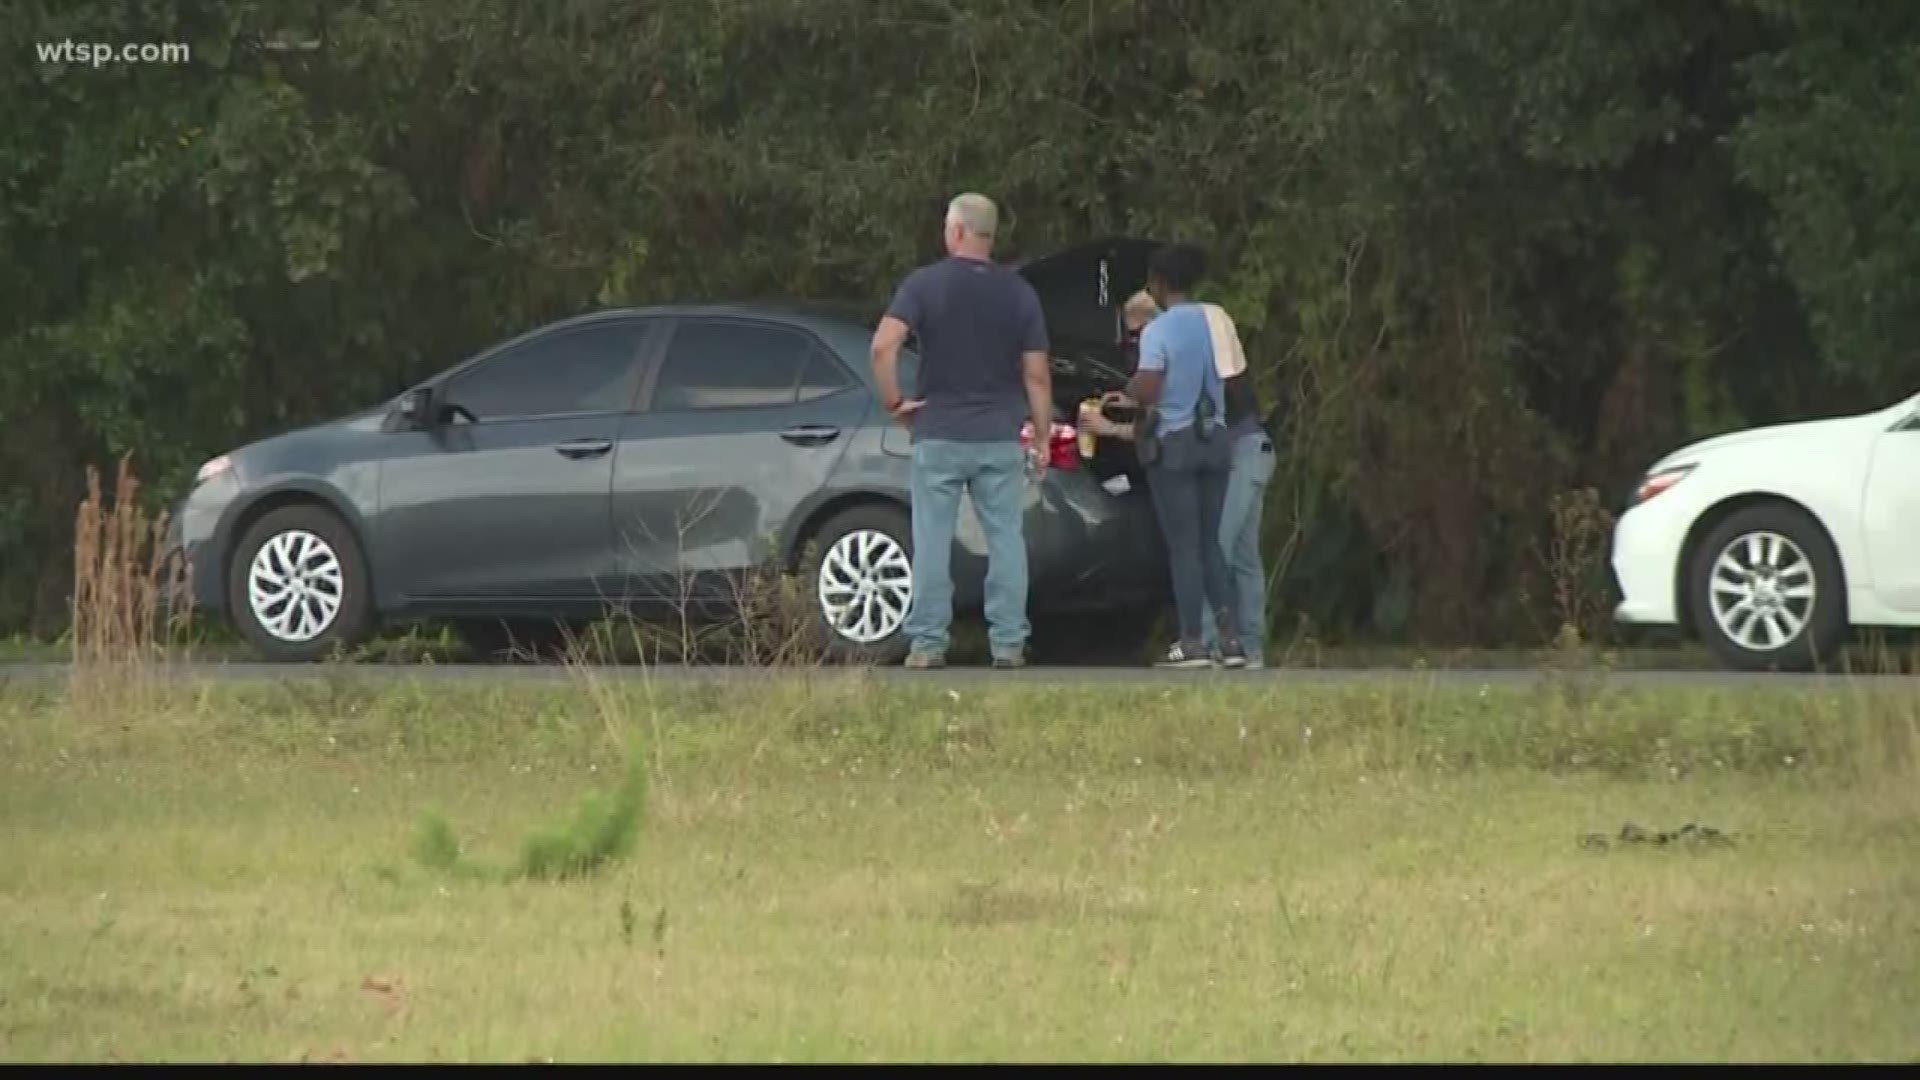 Police and the Hillsborough County Sheriff's Office are investigating an officer-involved shooting in Plant City.